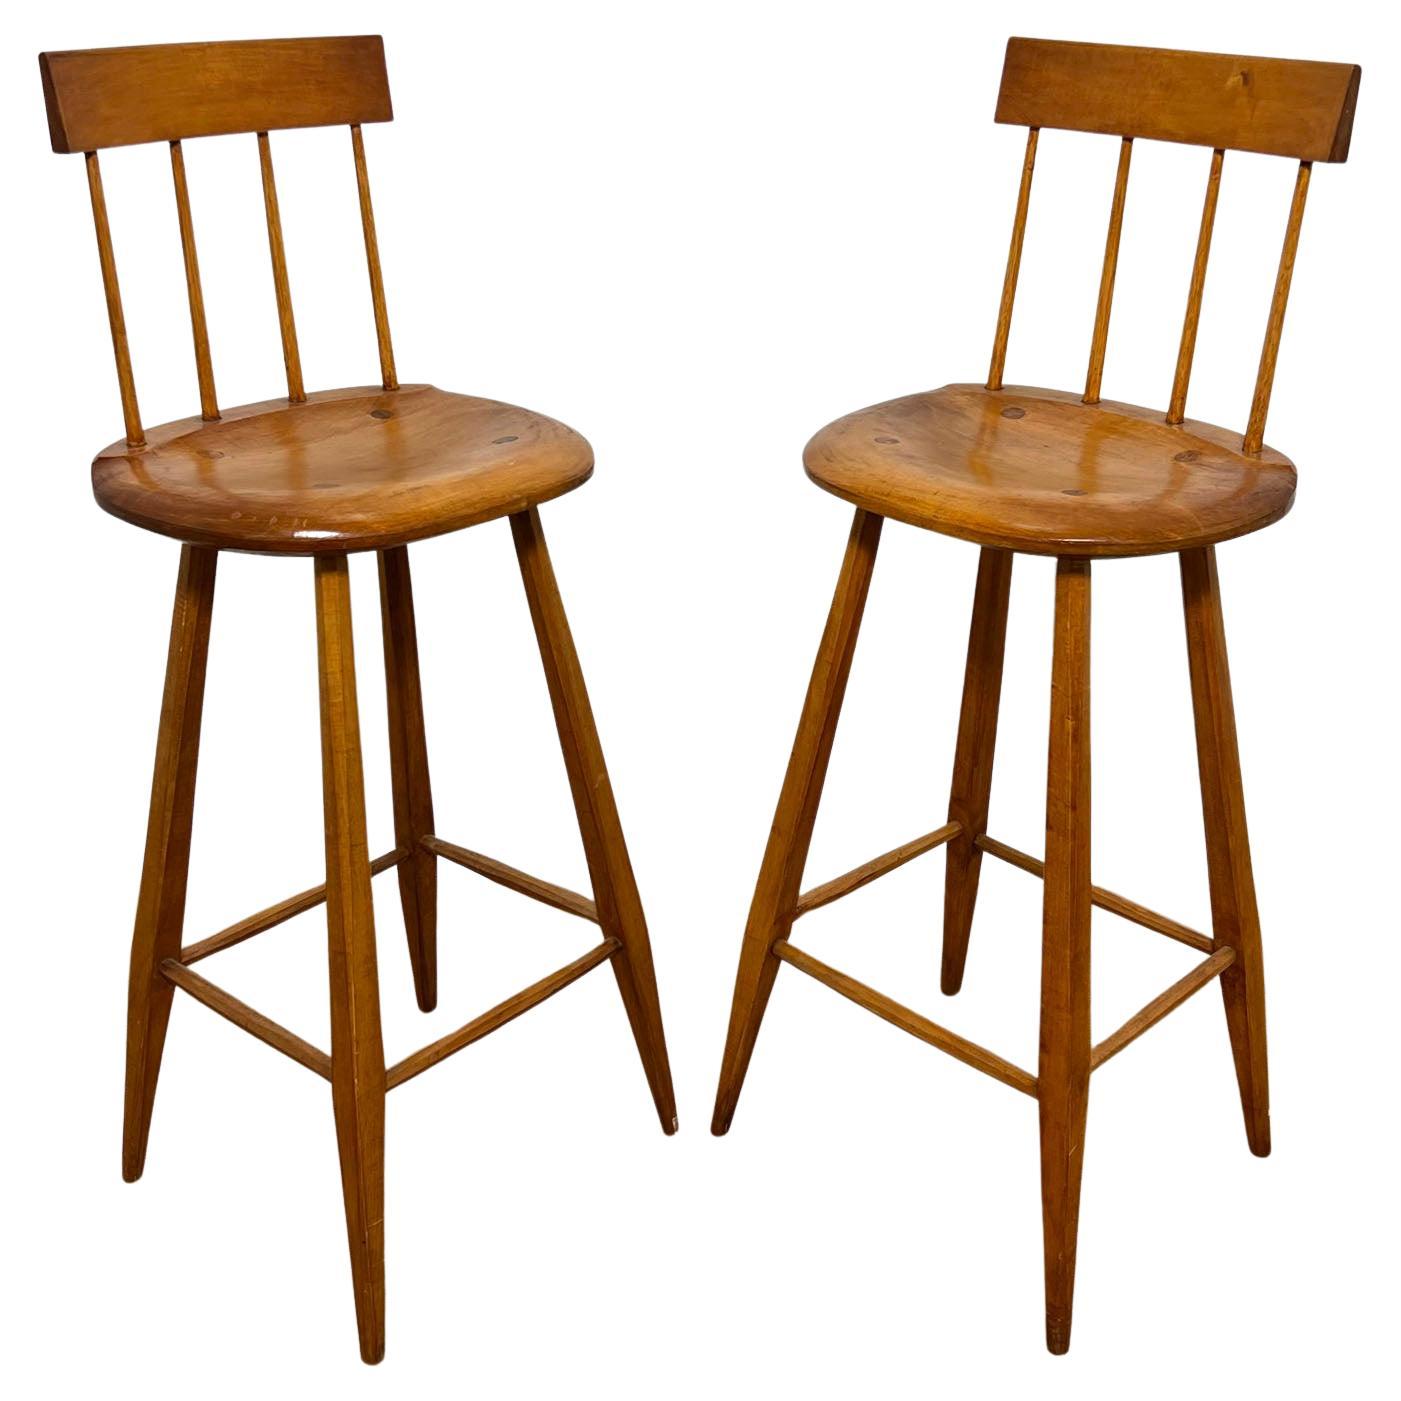 Pair of Hand Made Studio Craft Bar Stools by Bill Woodhead, D. 1985 For Sale